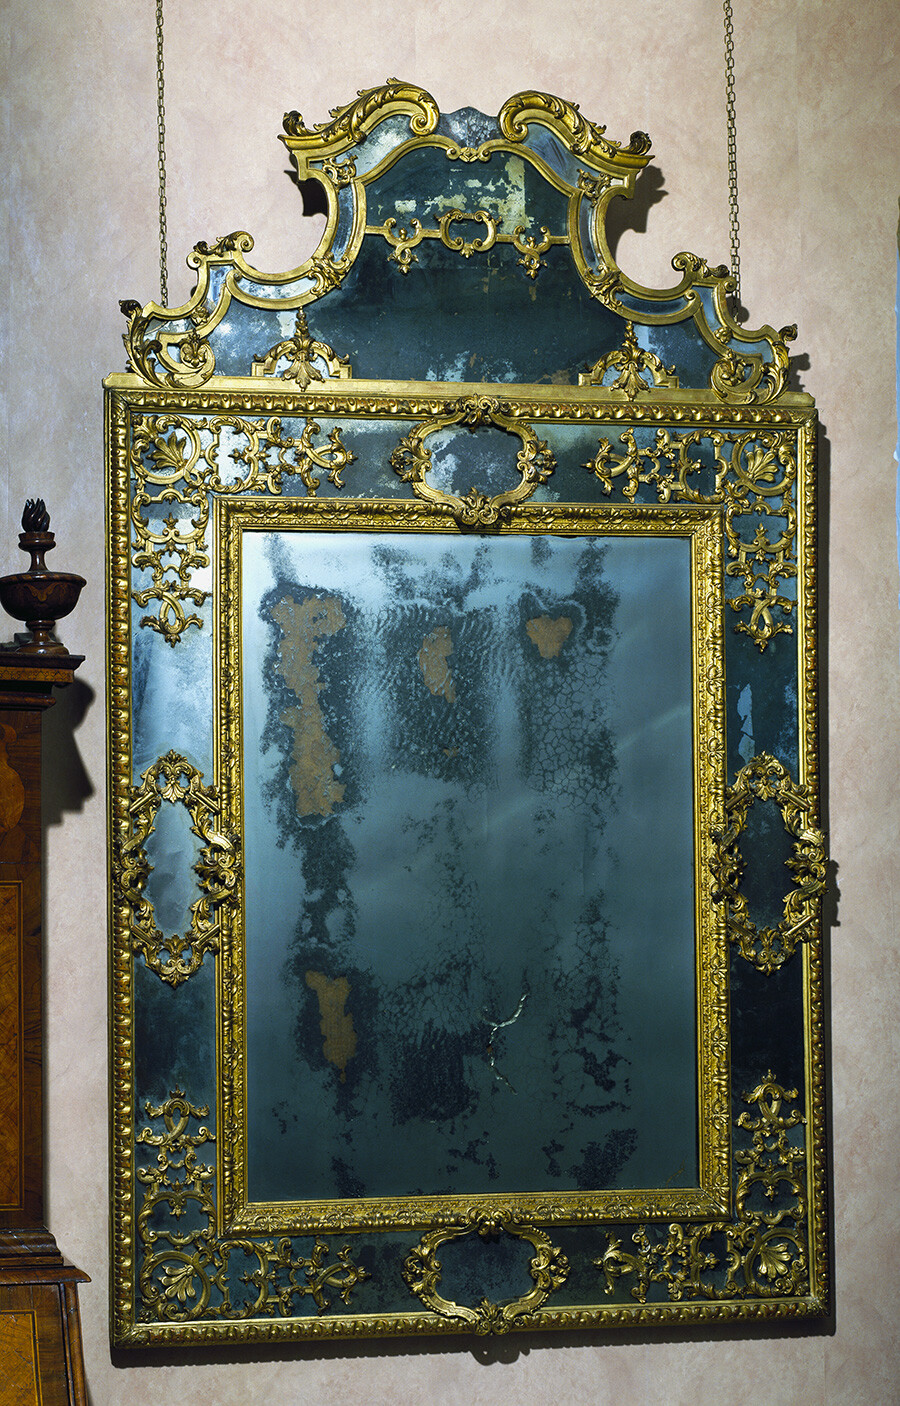 Baroque style Venetian mirror. Italy, late 17th-early 18th century. Such mirrors were used by the Russian noble beauties of the era.